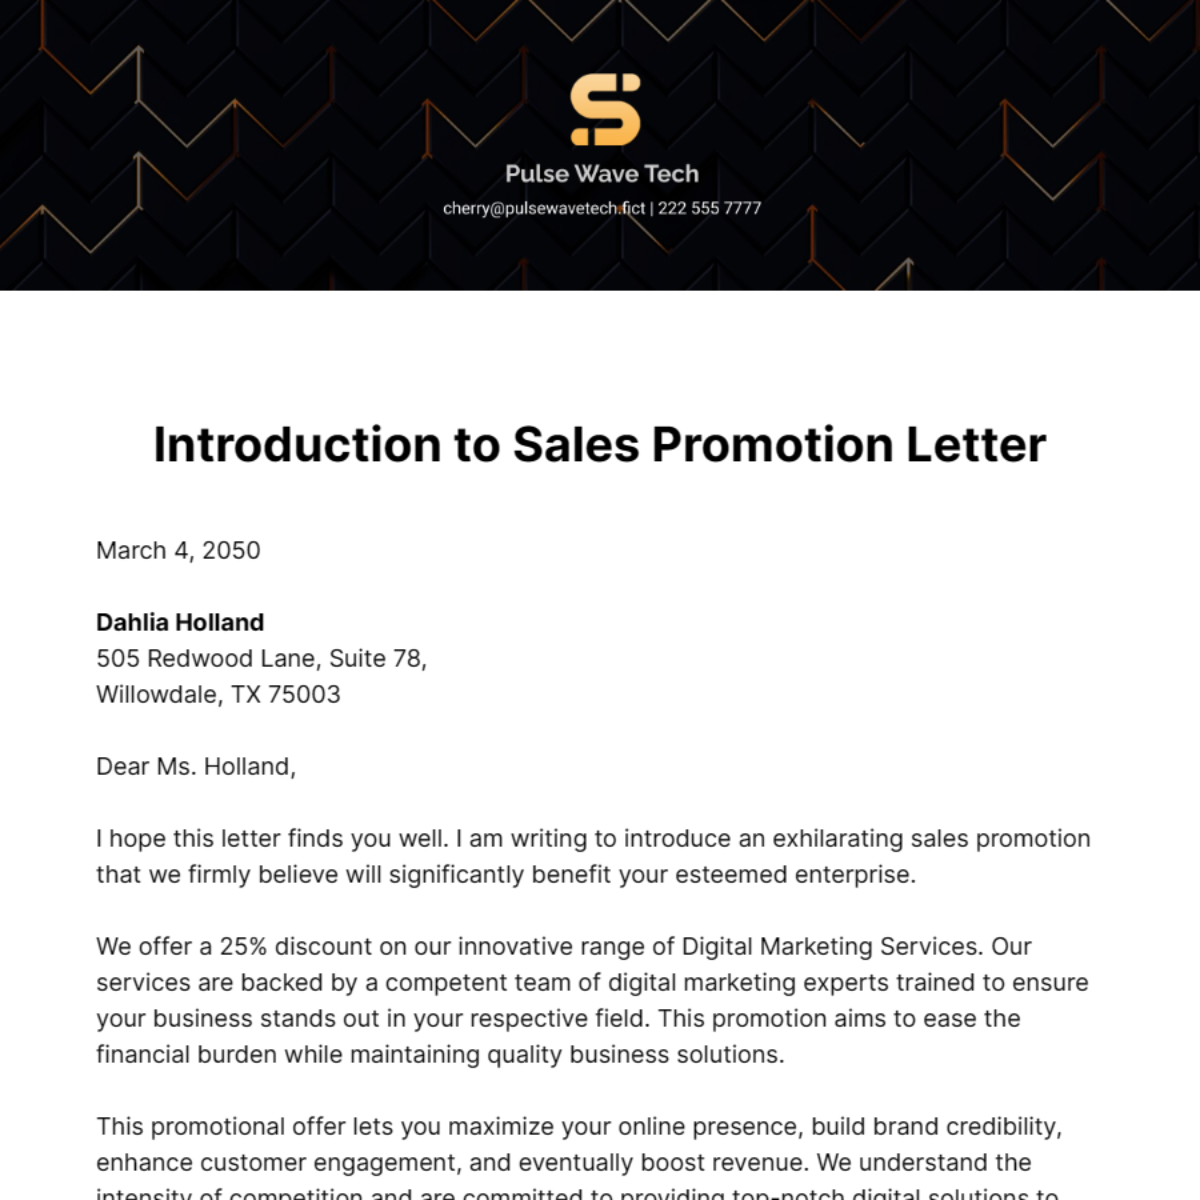 Introduction to Sales Promotion Letter Template